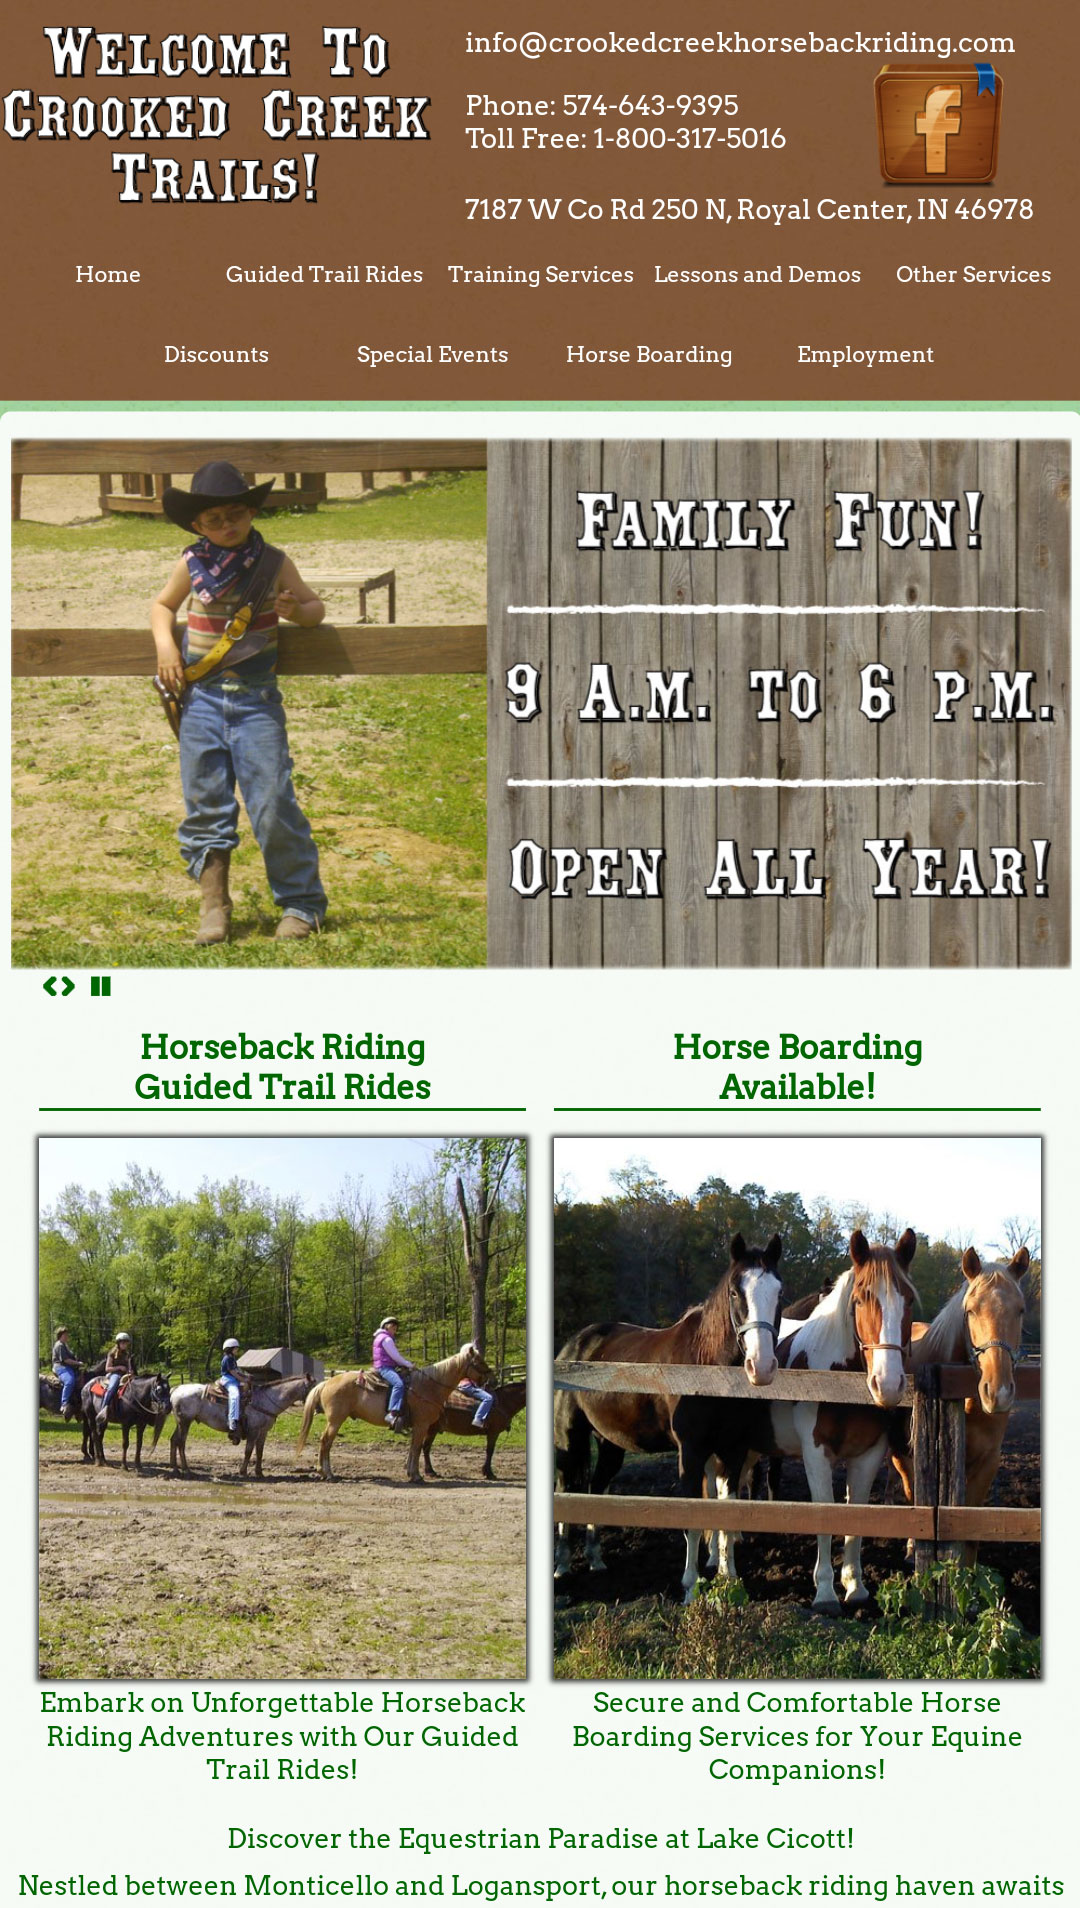 crooked creek trails horseback riding attraction indiana